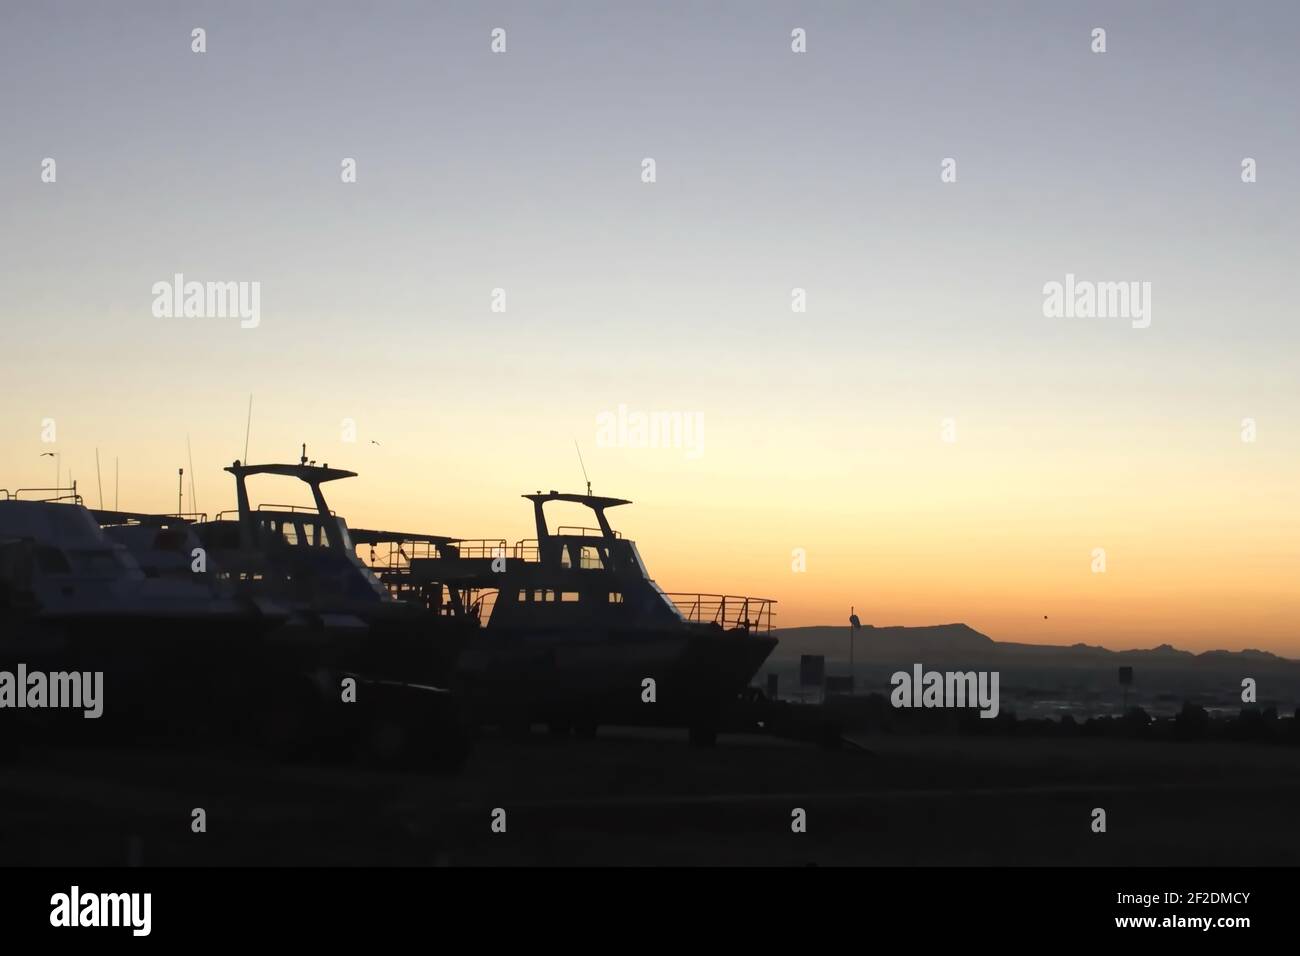 Boats silhouetted by the pier at sunrise in Gansbaai, South Africa Stock Photo